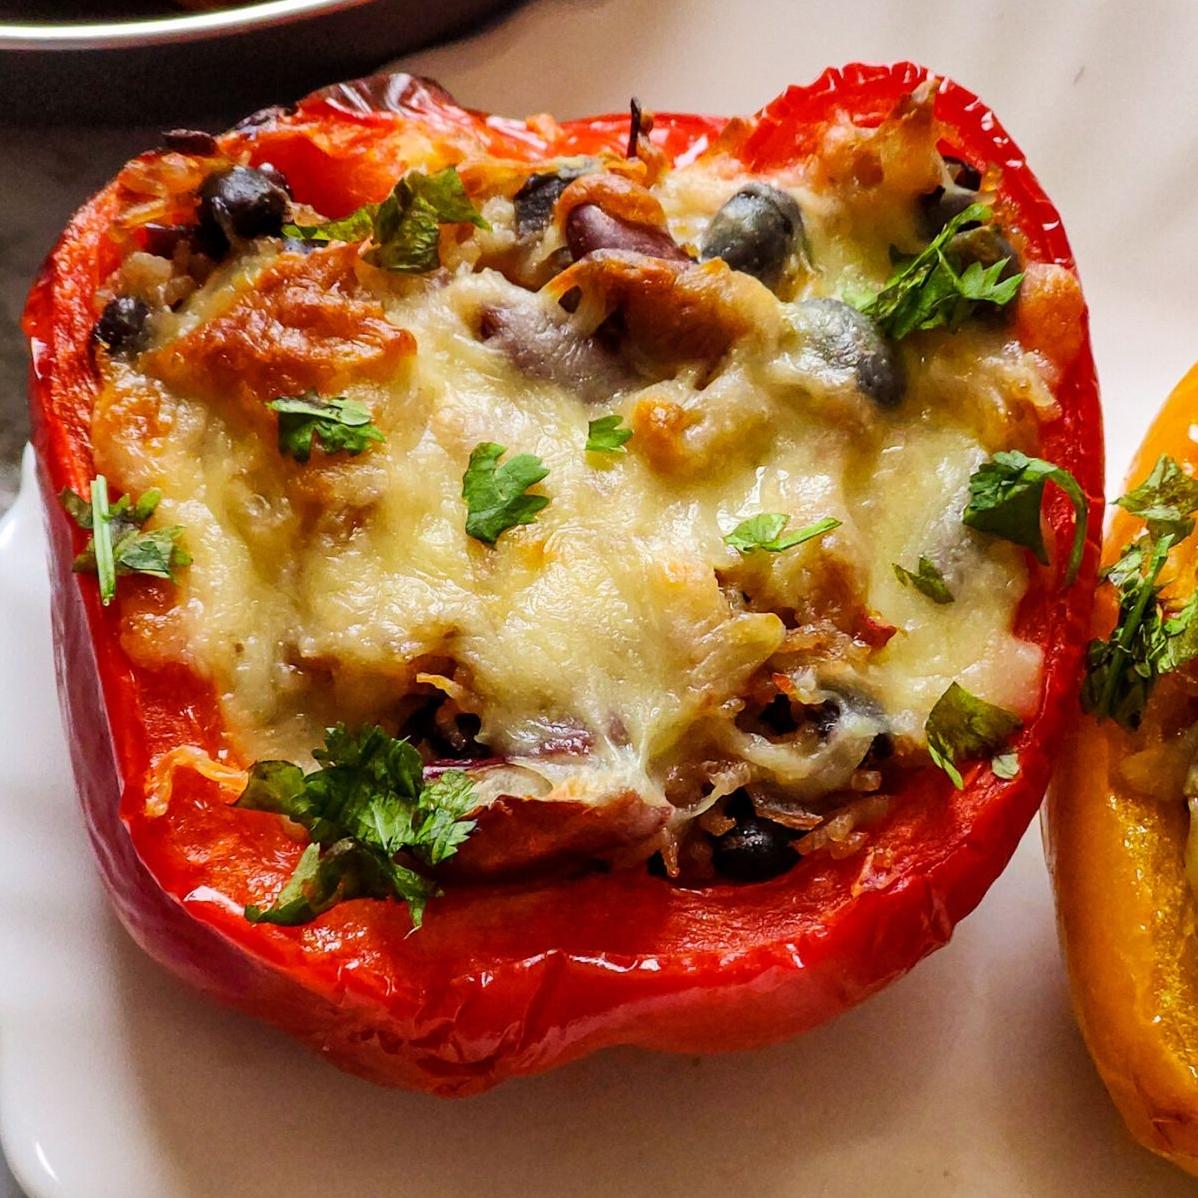  These stuffed bell peppers are a hearty meal that will leave you satisfied.